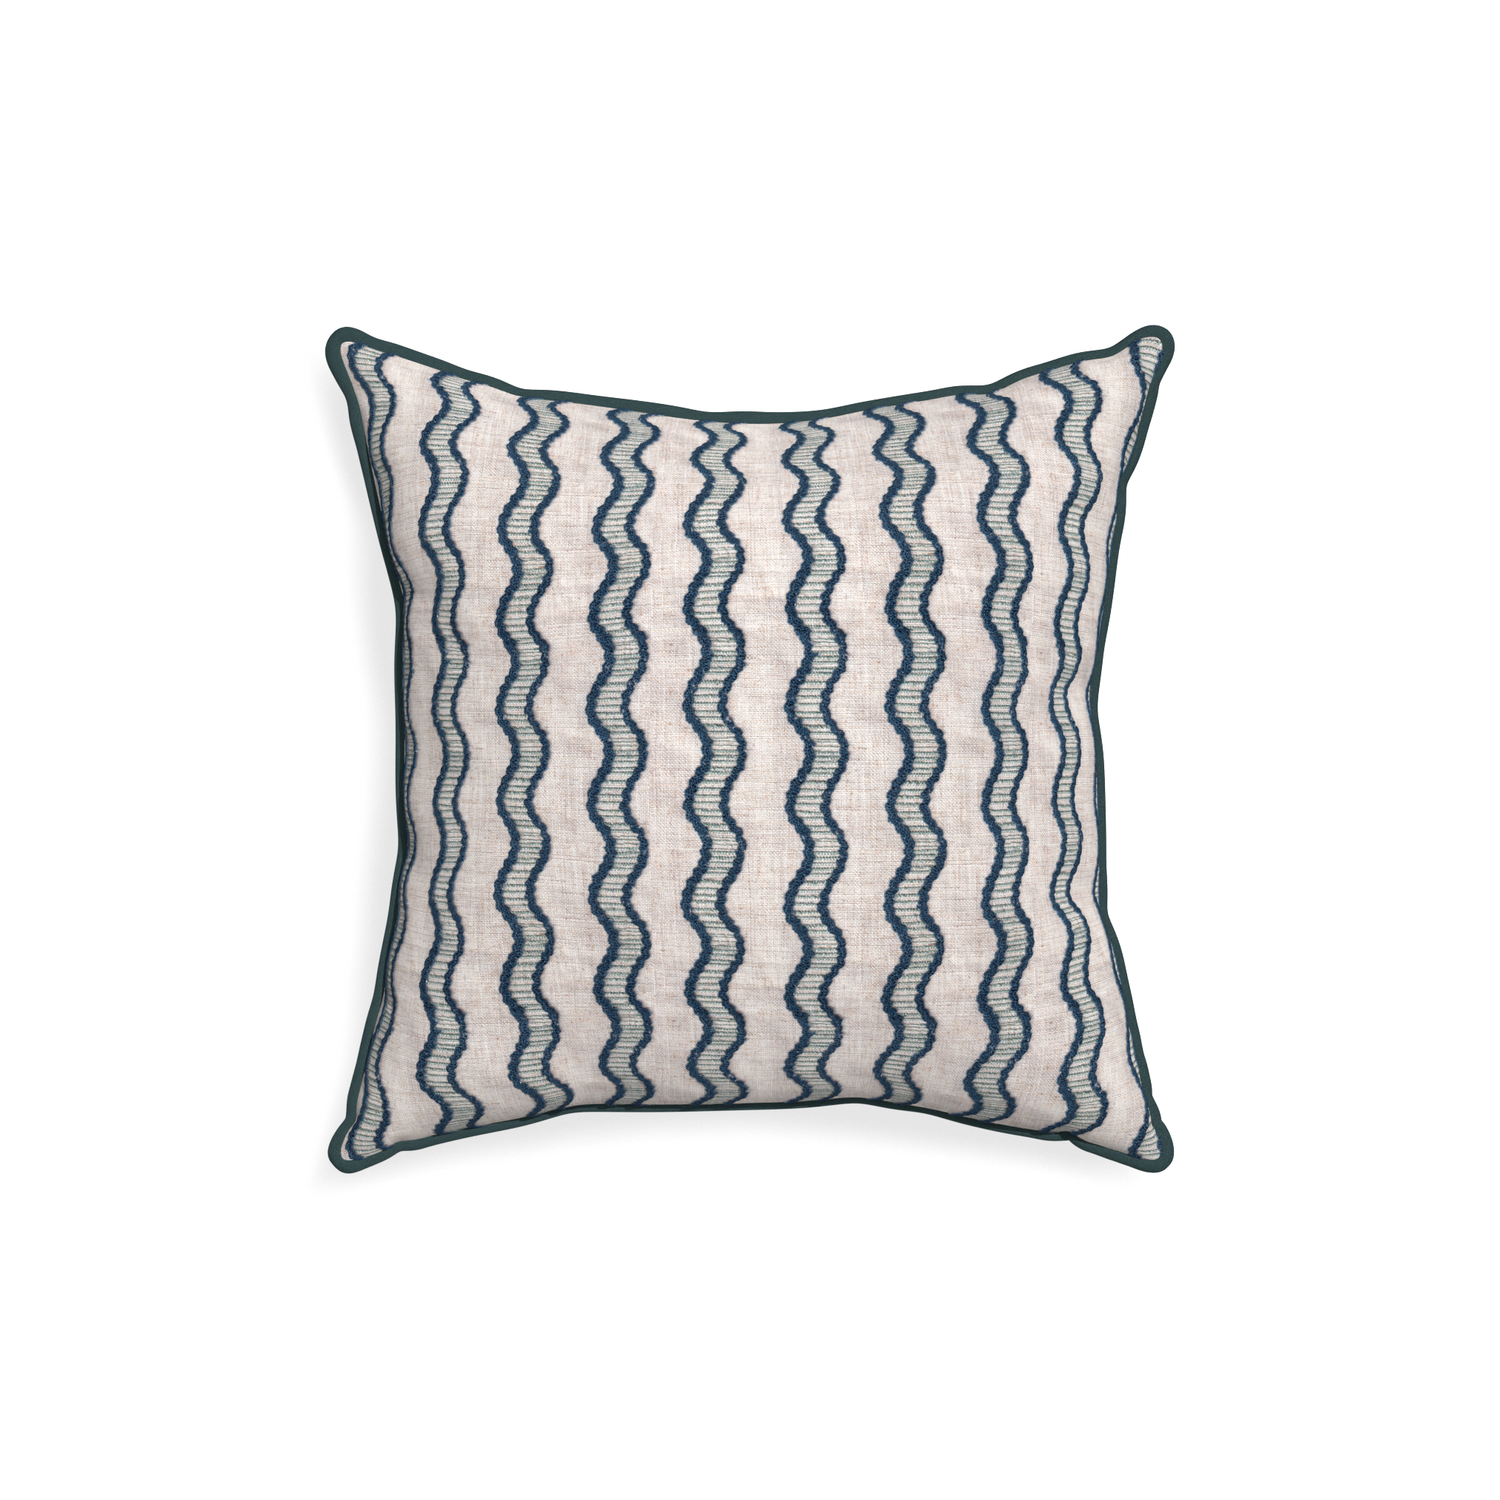 18-square beatrice custom embroidered wavepillow with p piping on white background